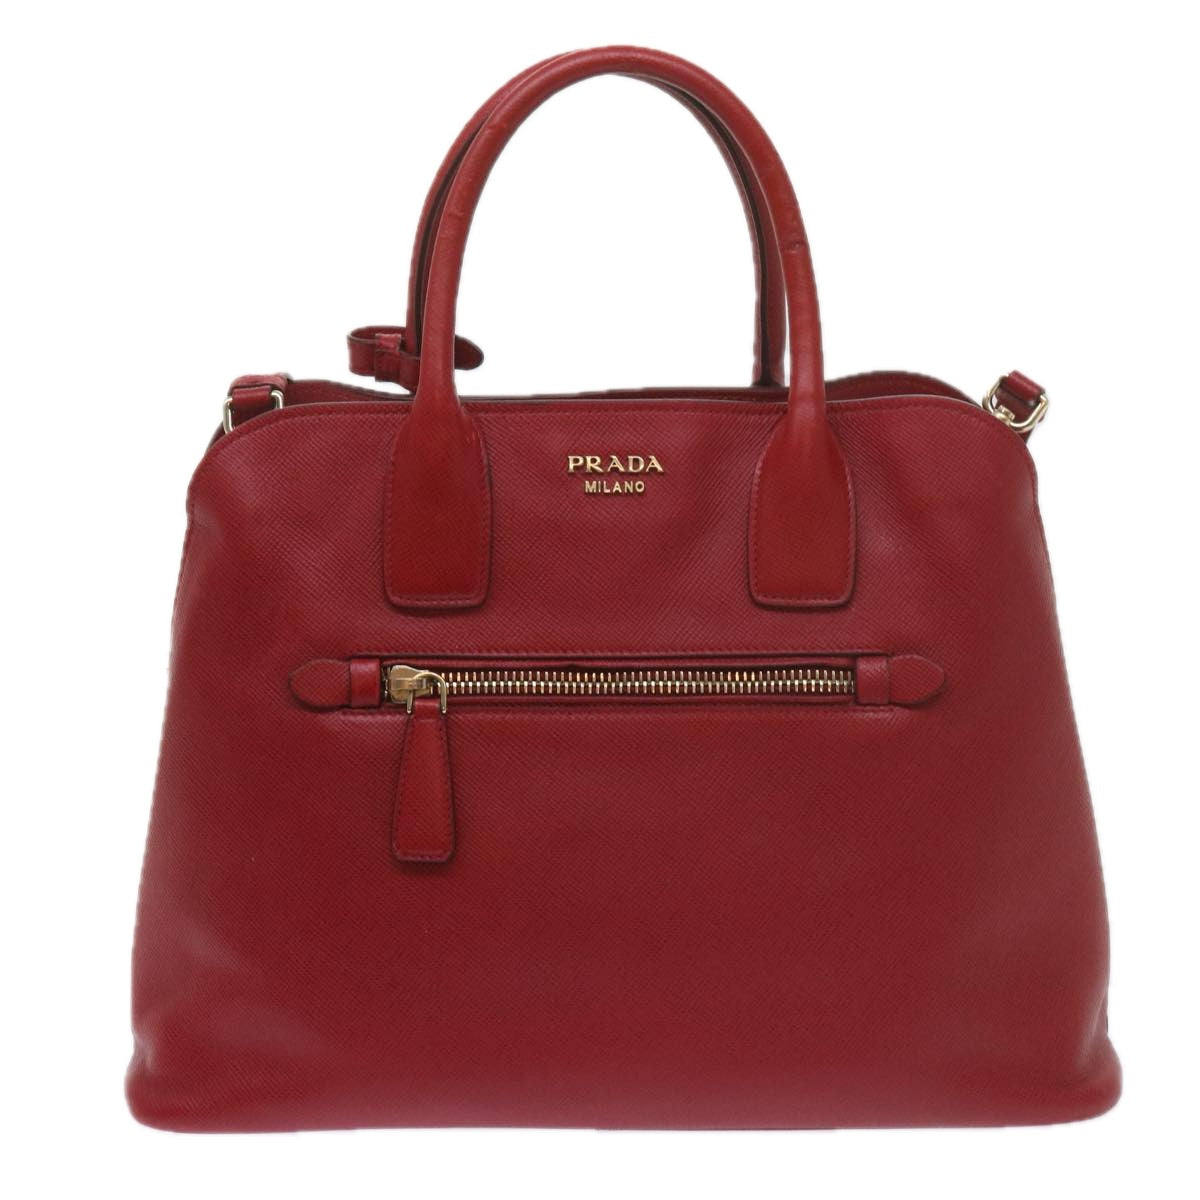 PRADA Hand Bag Leather 2way Red Auth bs10429 - 0